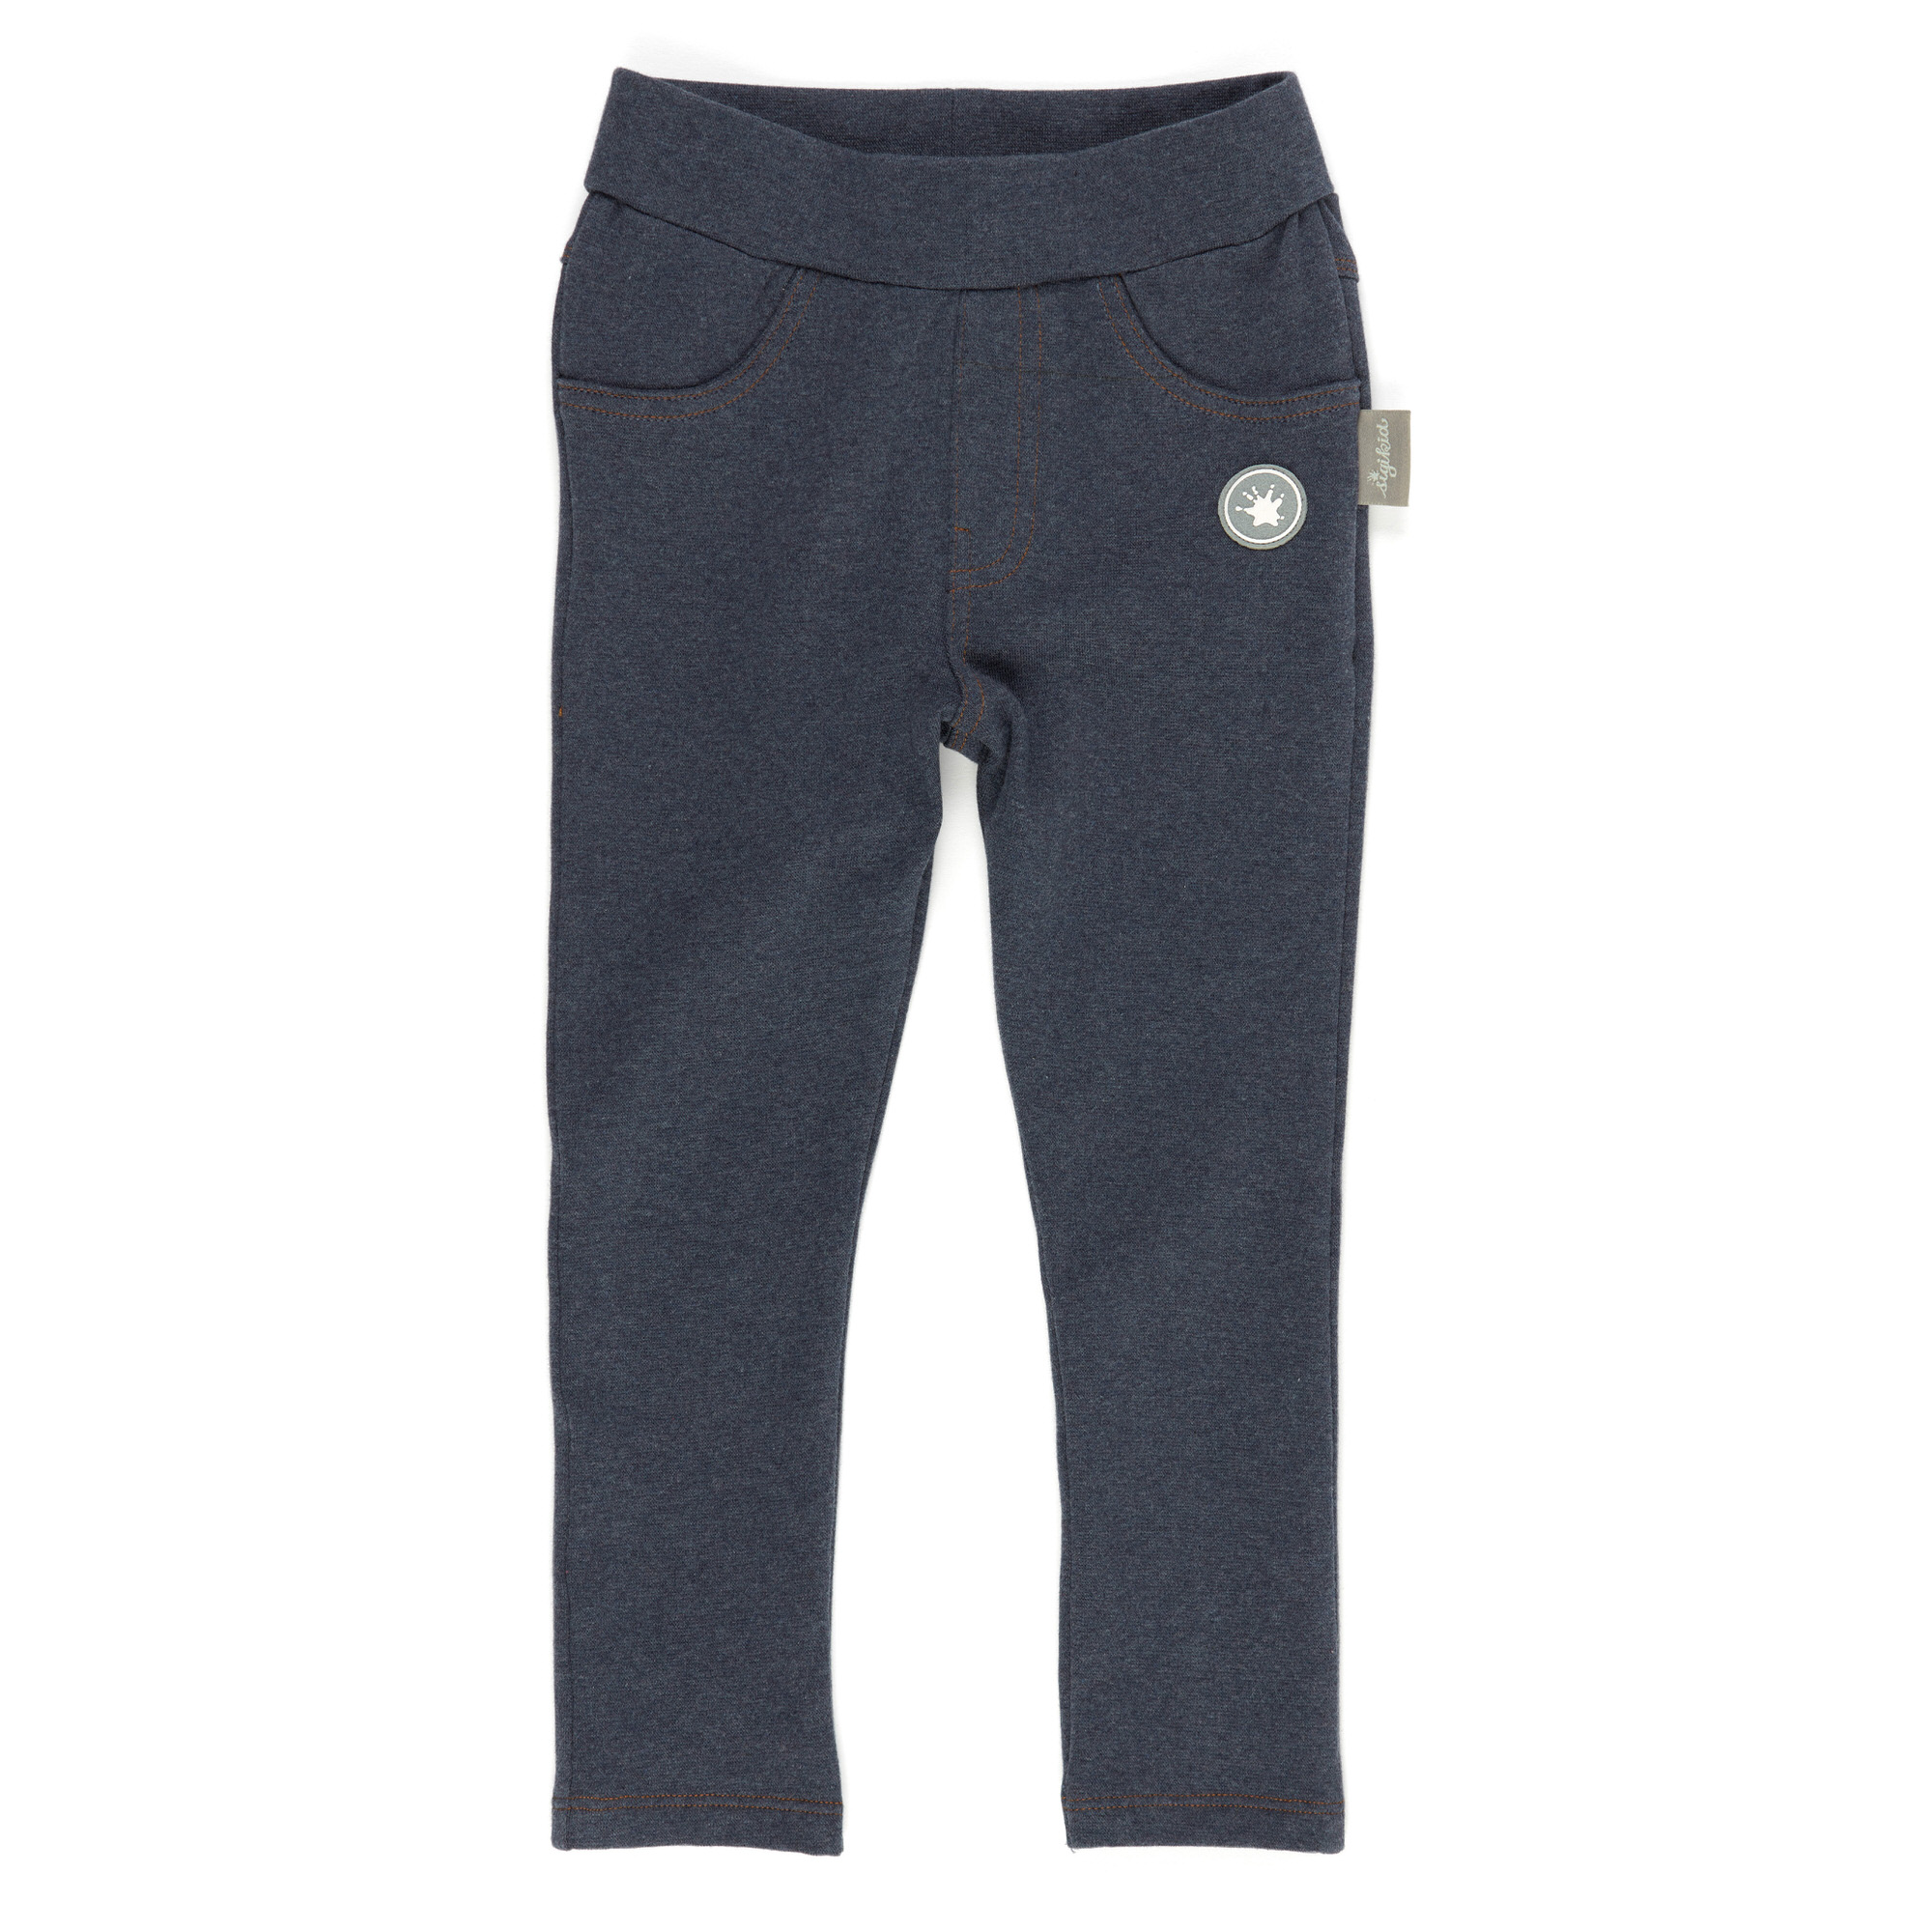 Kids' jeans style leggings, ultra stretchy